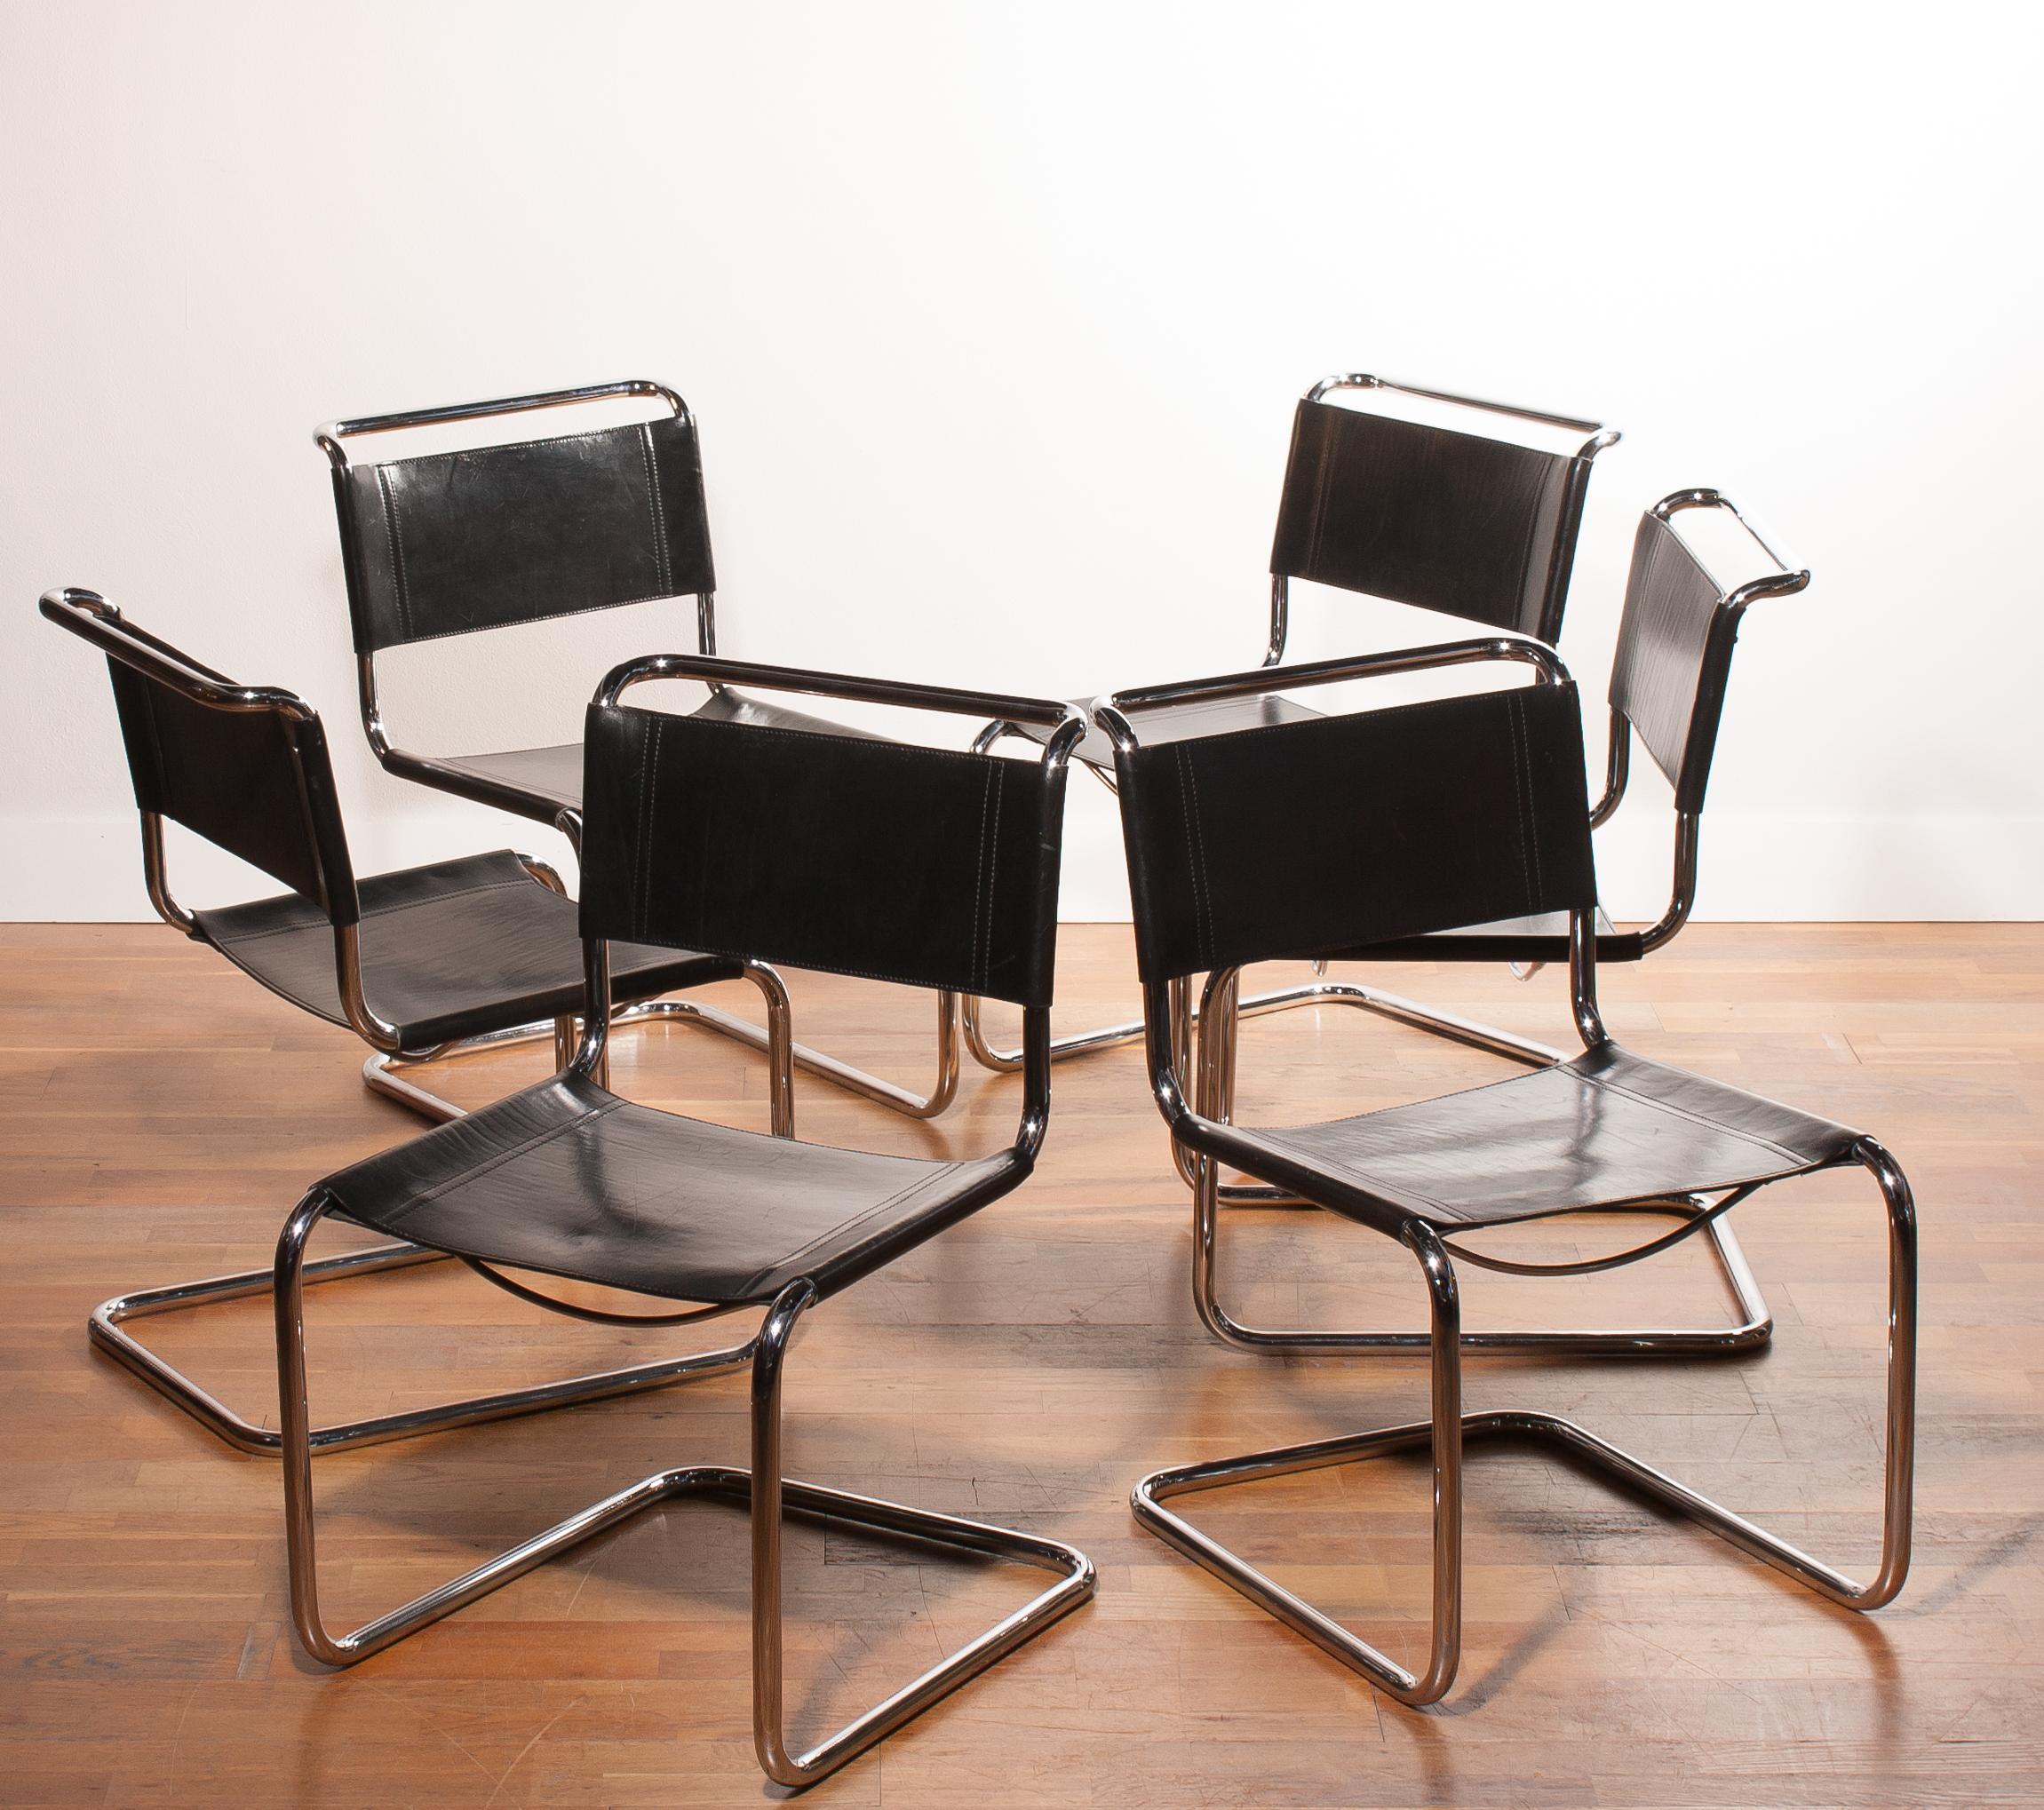 A beautiful set of six dining chairs designed by Mart Stam for Fasem.
These chairs have a cantilevered tubular metal chrome frame with black saddle leather seating and backrest.
They are in a wonderful condition.
Period 1970s
Dimensions: H 84 cm, W